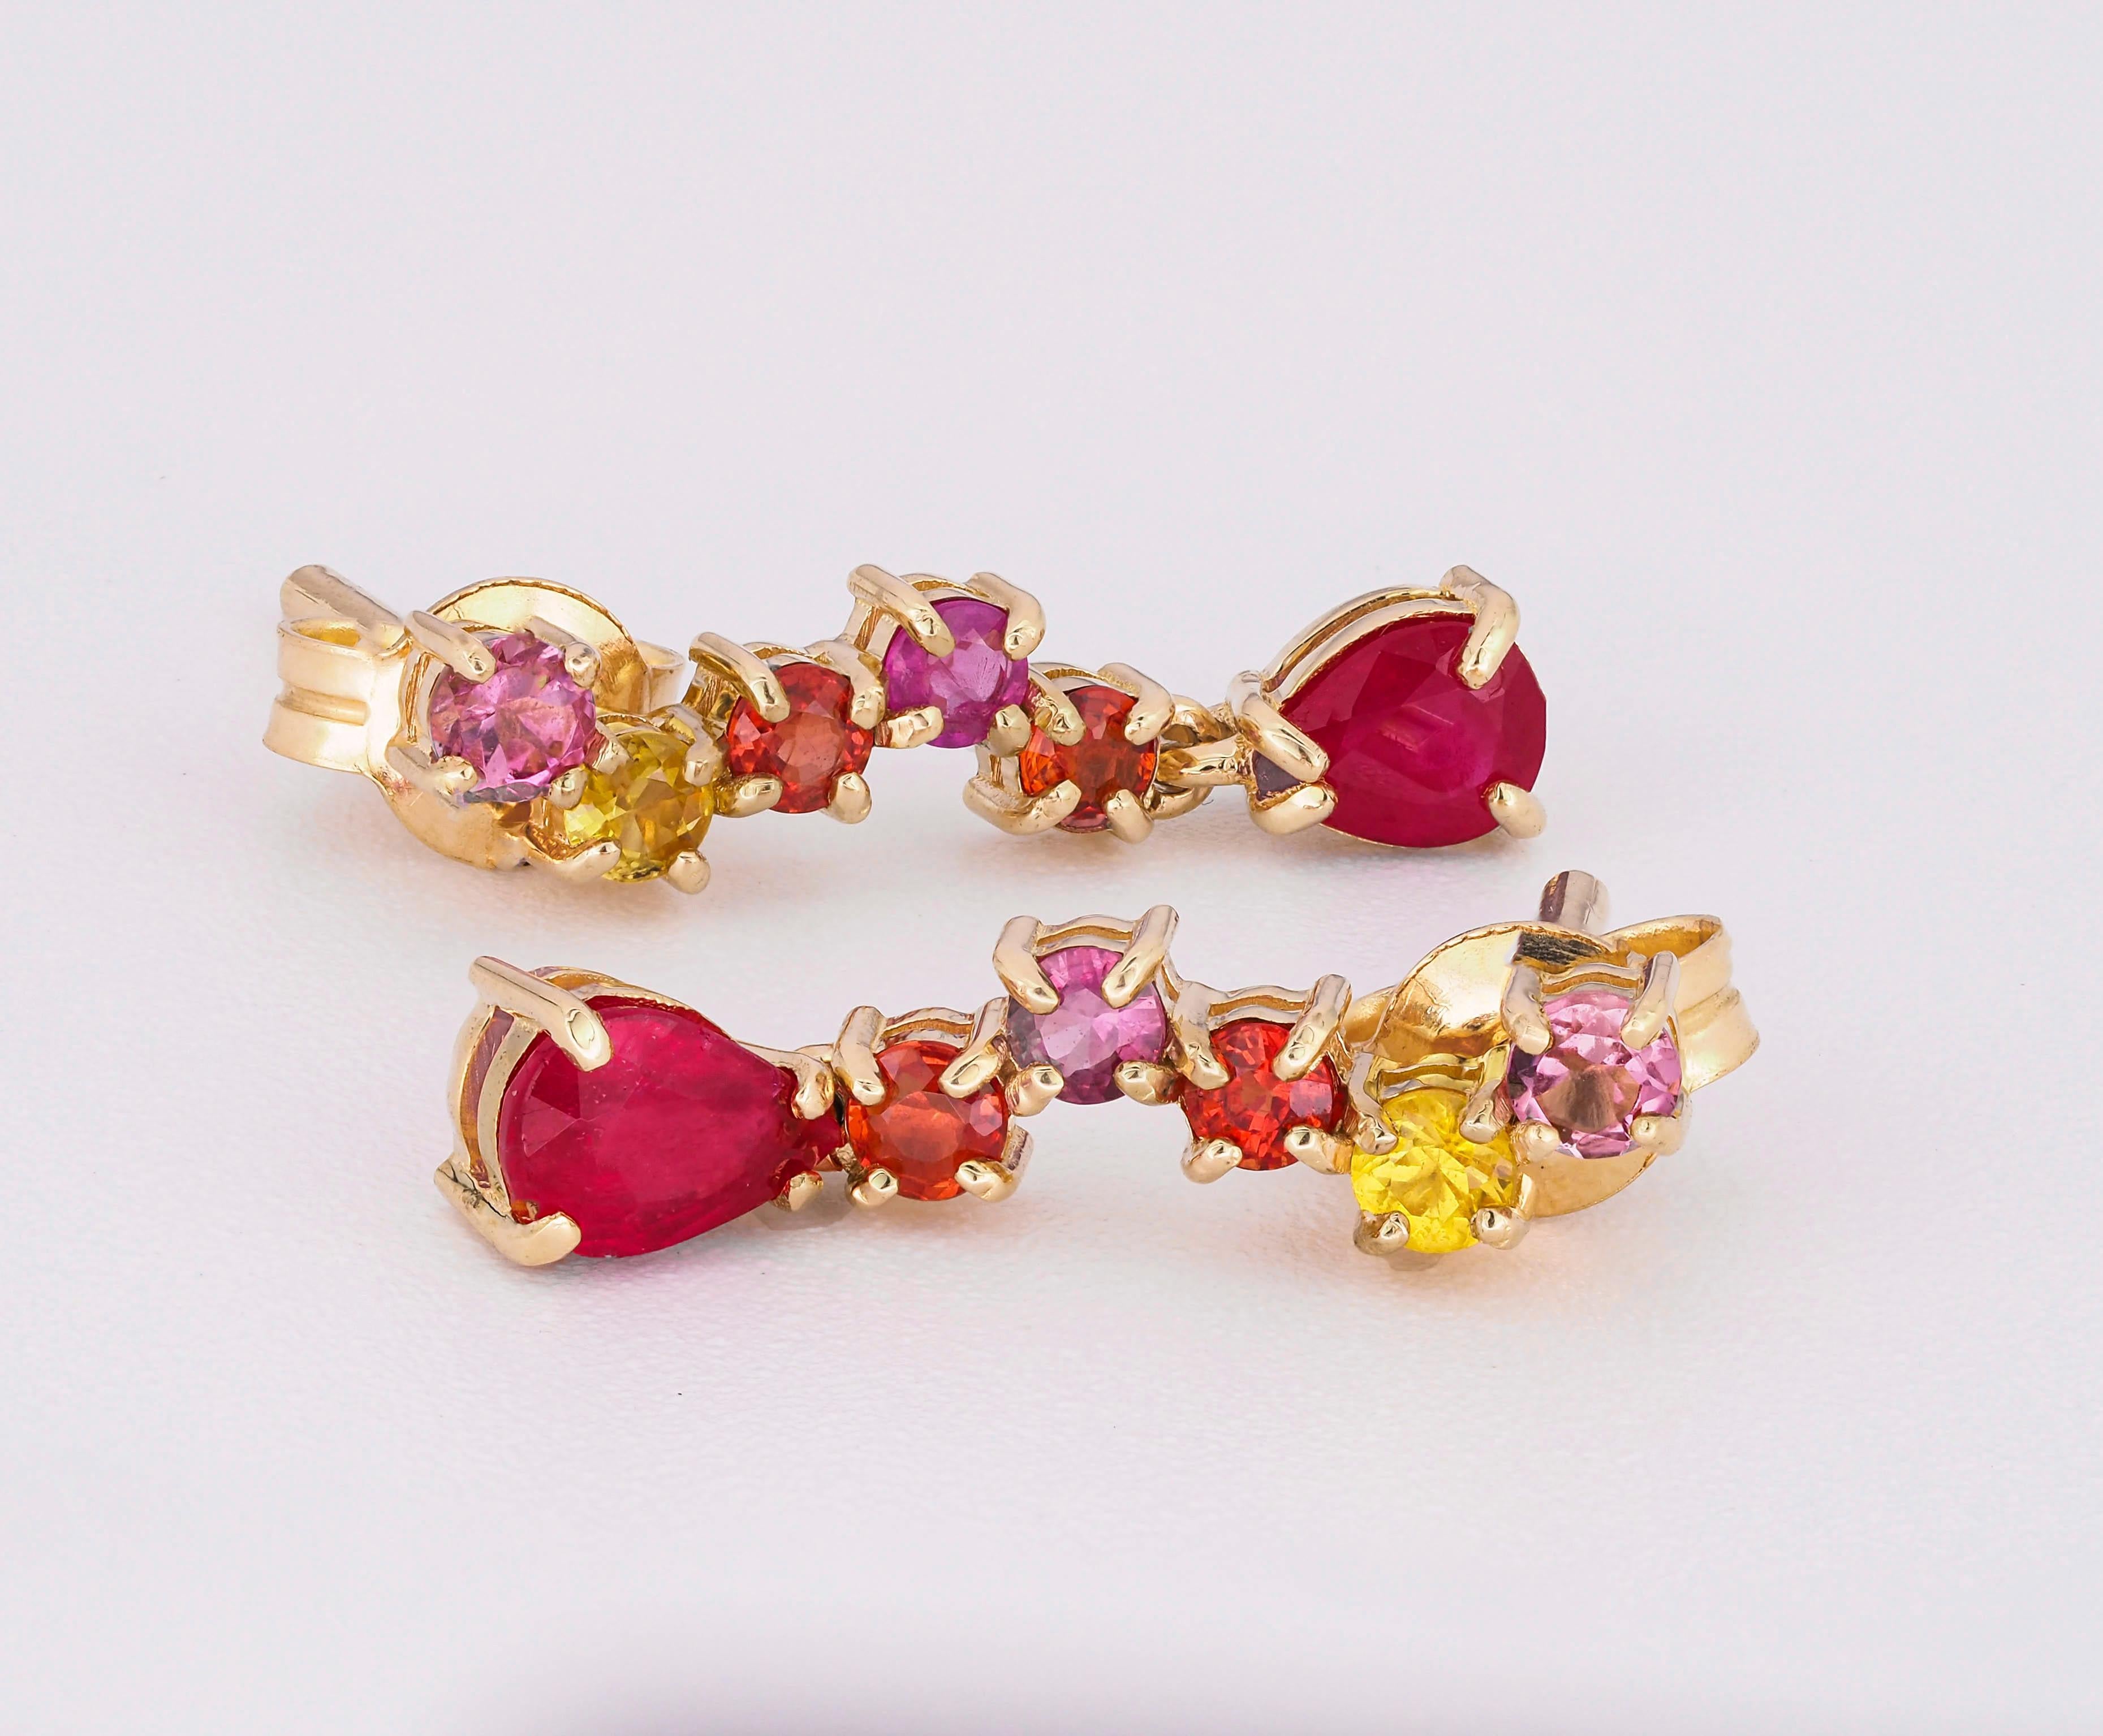 Women's 14k Gold Earrings Studs with Multicolor Sapphires and Rubies